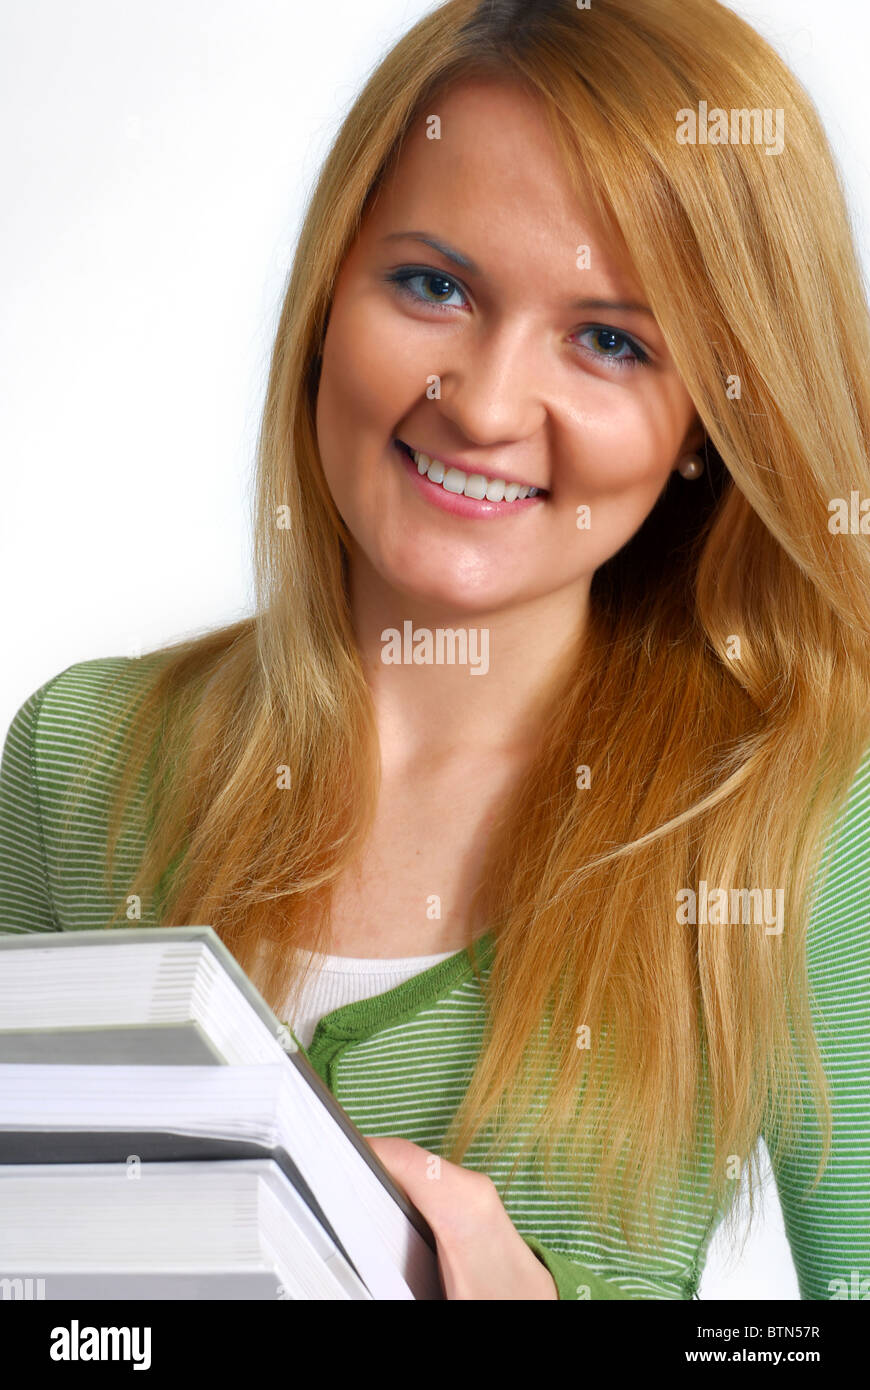 Portrait of a beautiful young female student, holding books Stock Photo